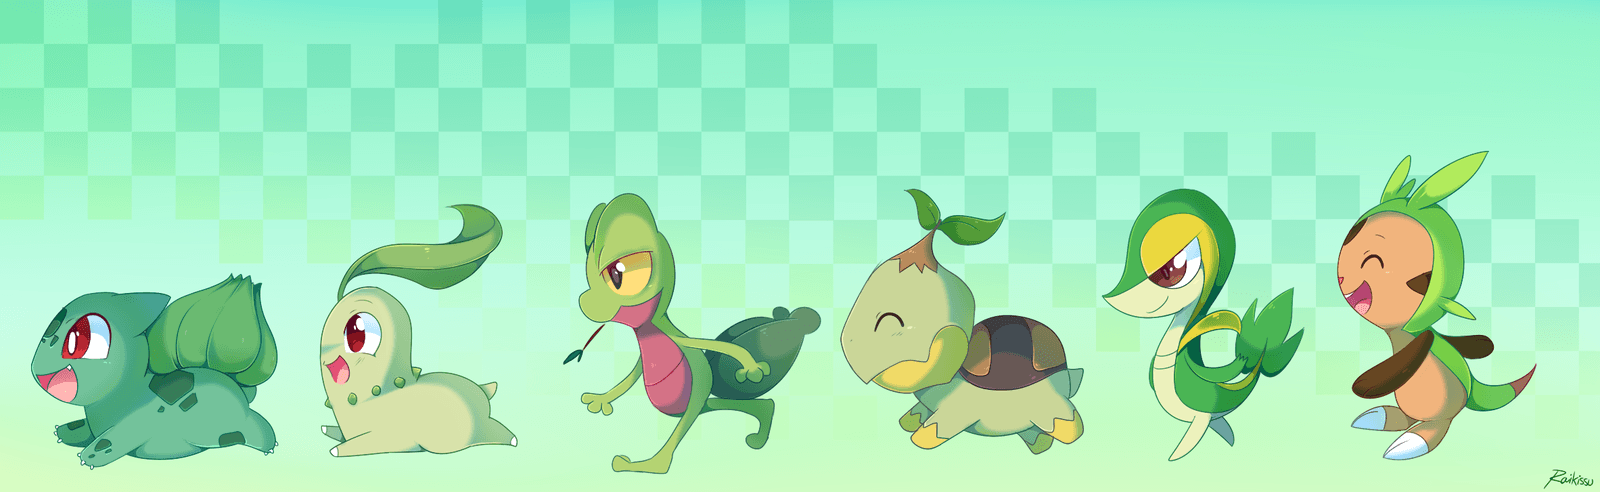 With all the talk about the new starters, I realized that Chespin is